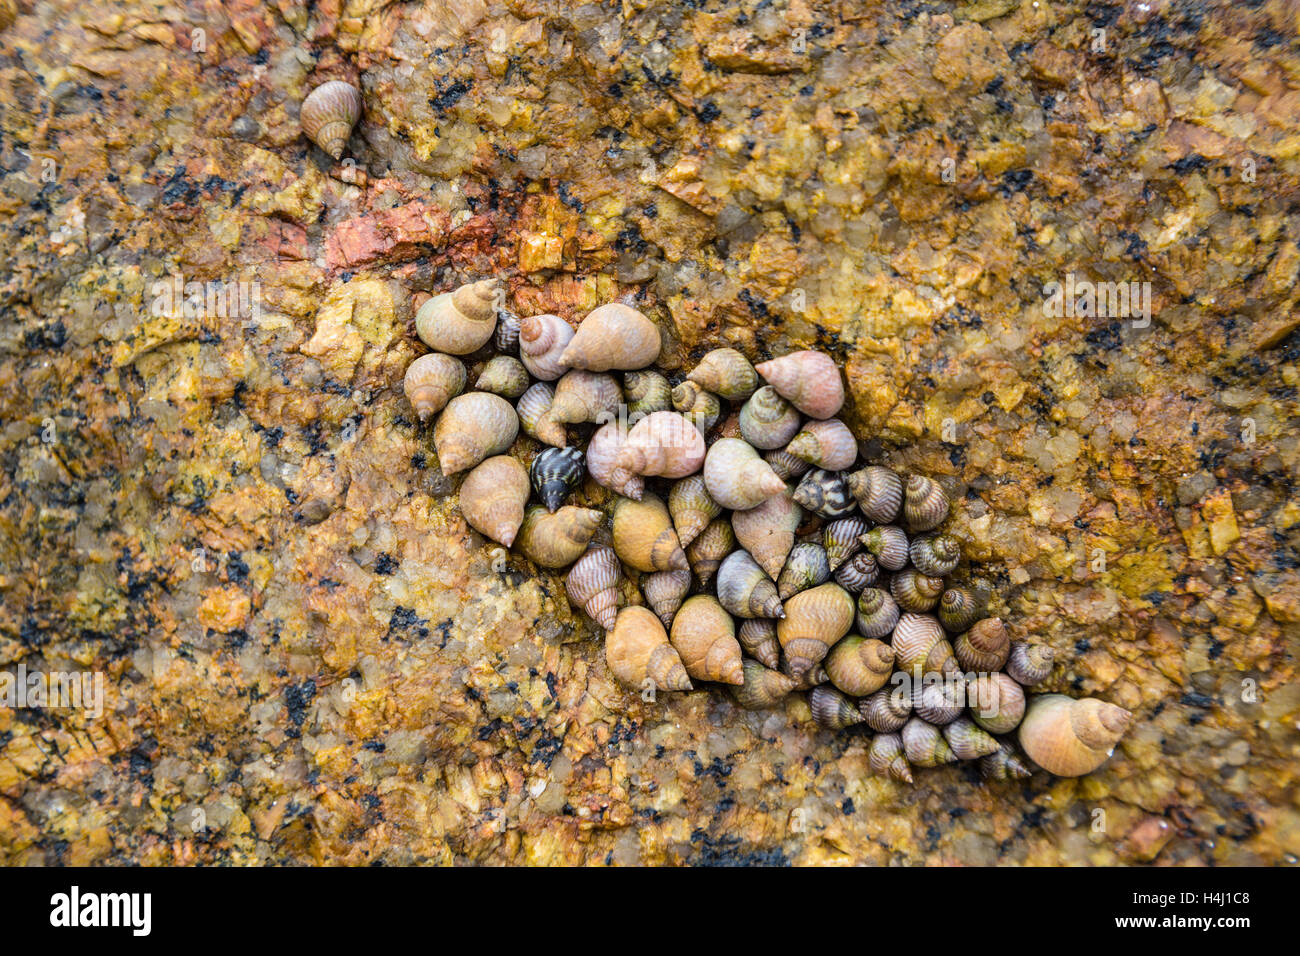 A tightly packed group of sea shells on a granite rock in La Digue, Seychelles Stock Photo